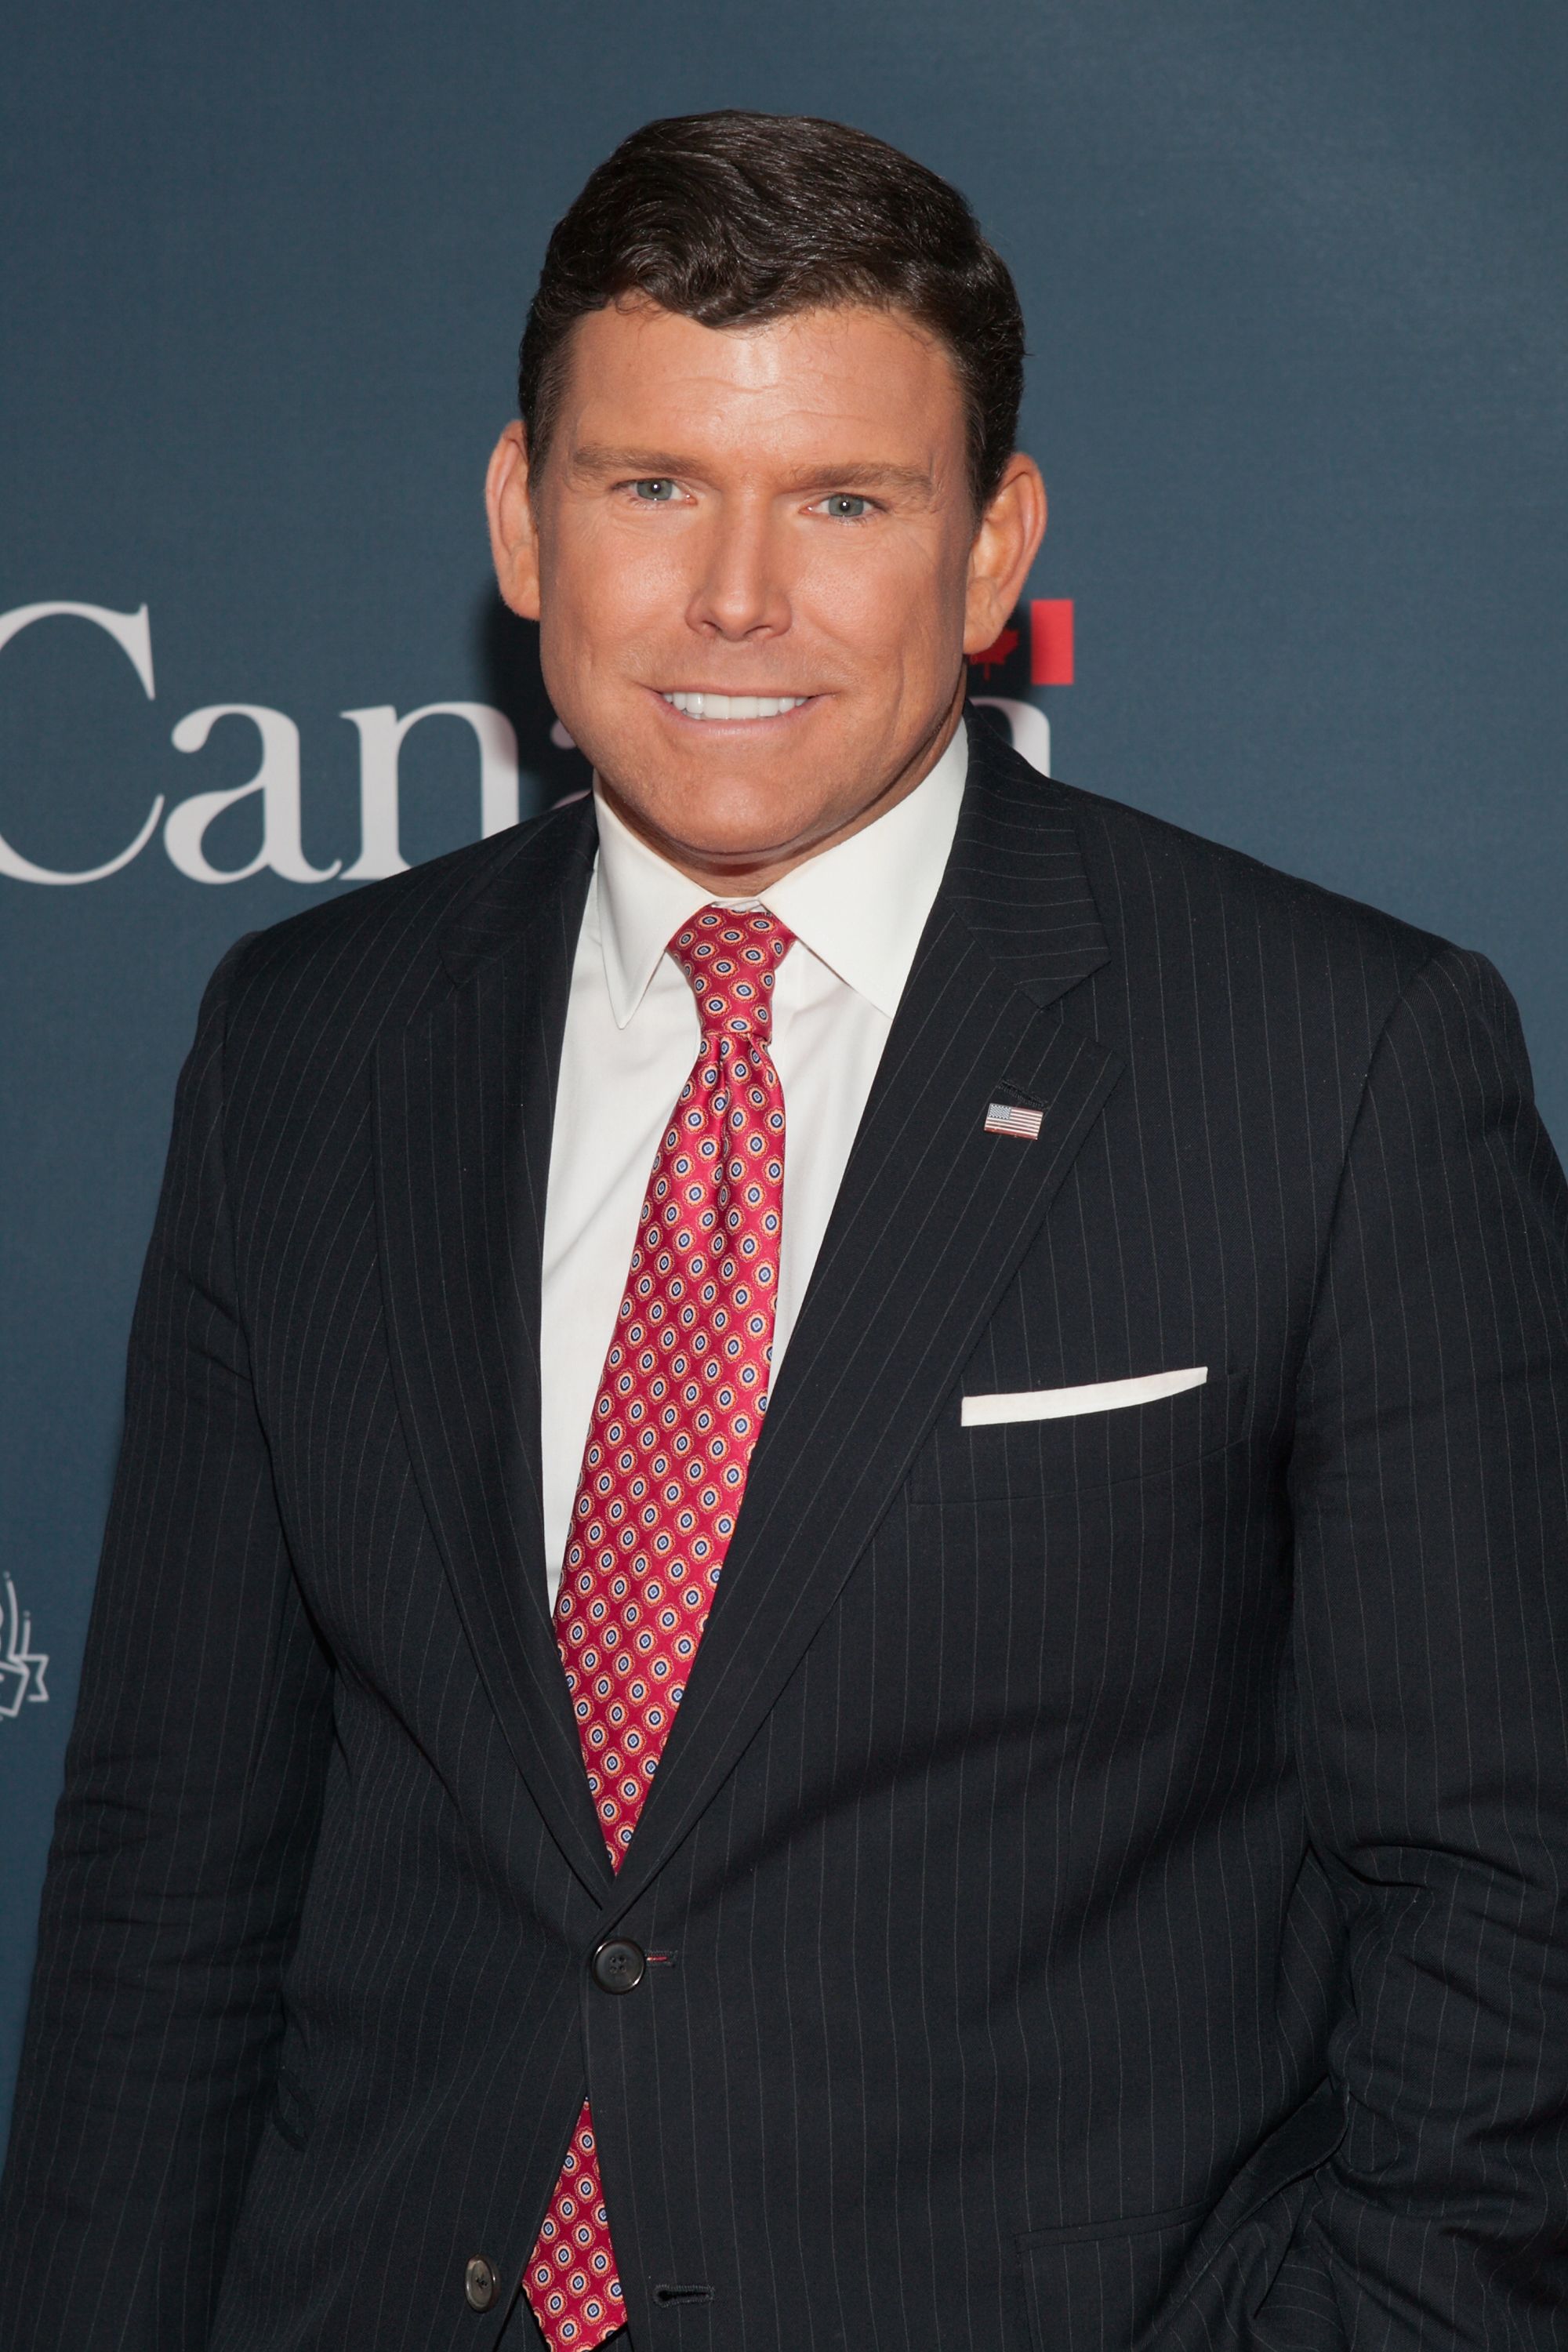 Bret Baier atThe Hill's and Entertainment Tonight's celebration of the 100th White House Correspondents' Association Dinner weekend on May 2, 2014, in Washington, DC. | Photo: Teresa Kroeger/Getty Images